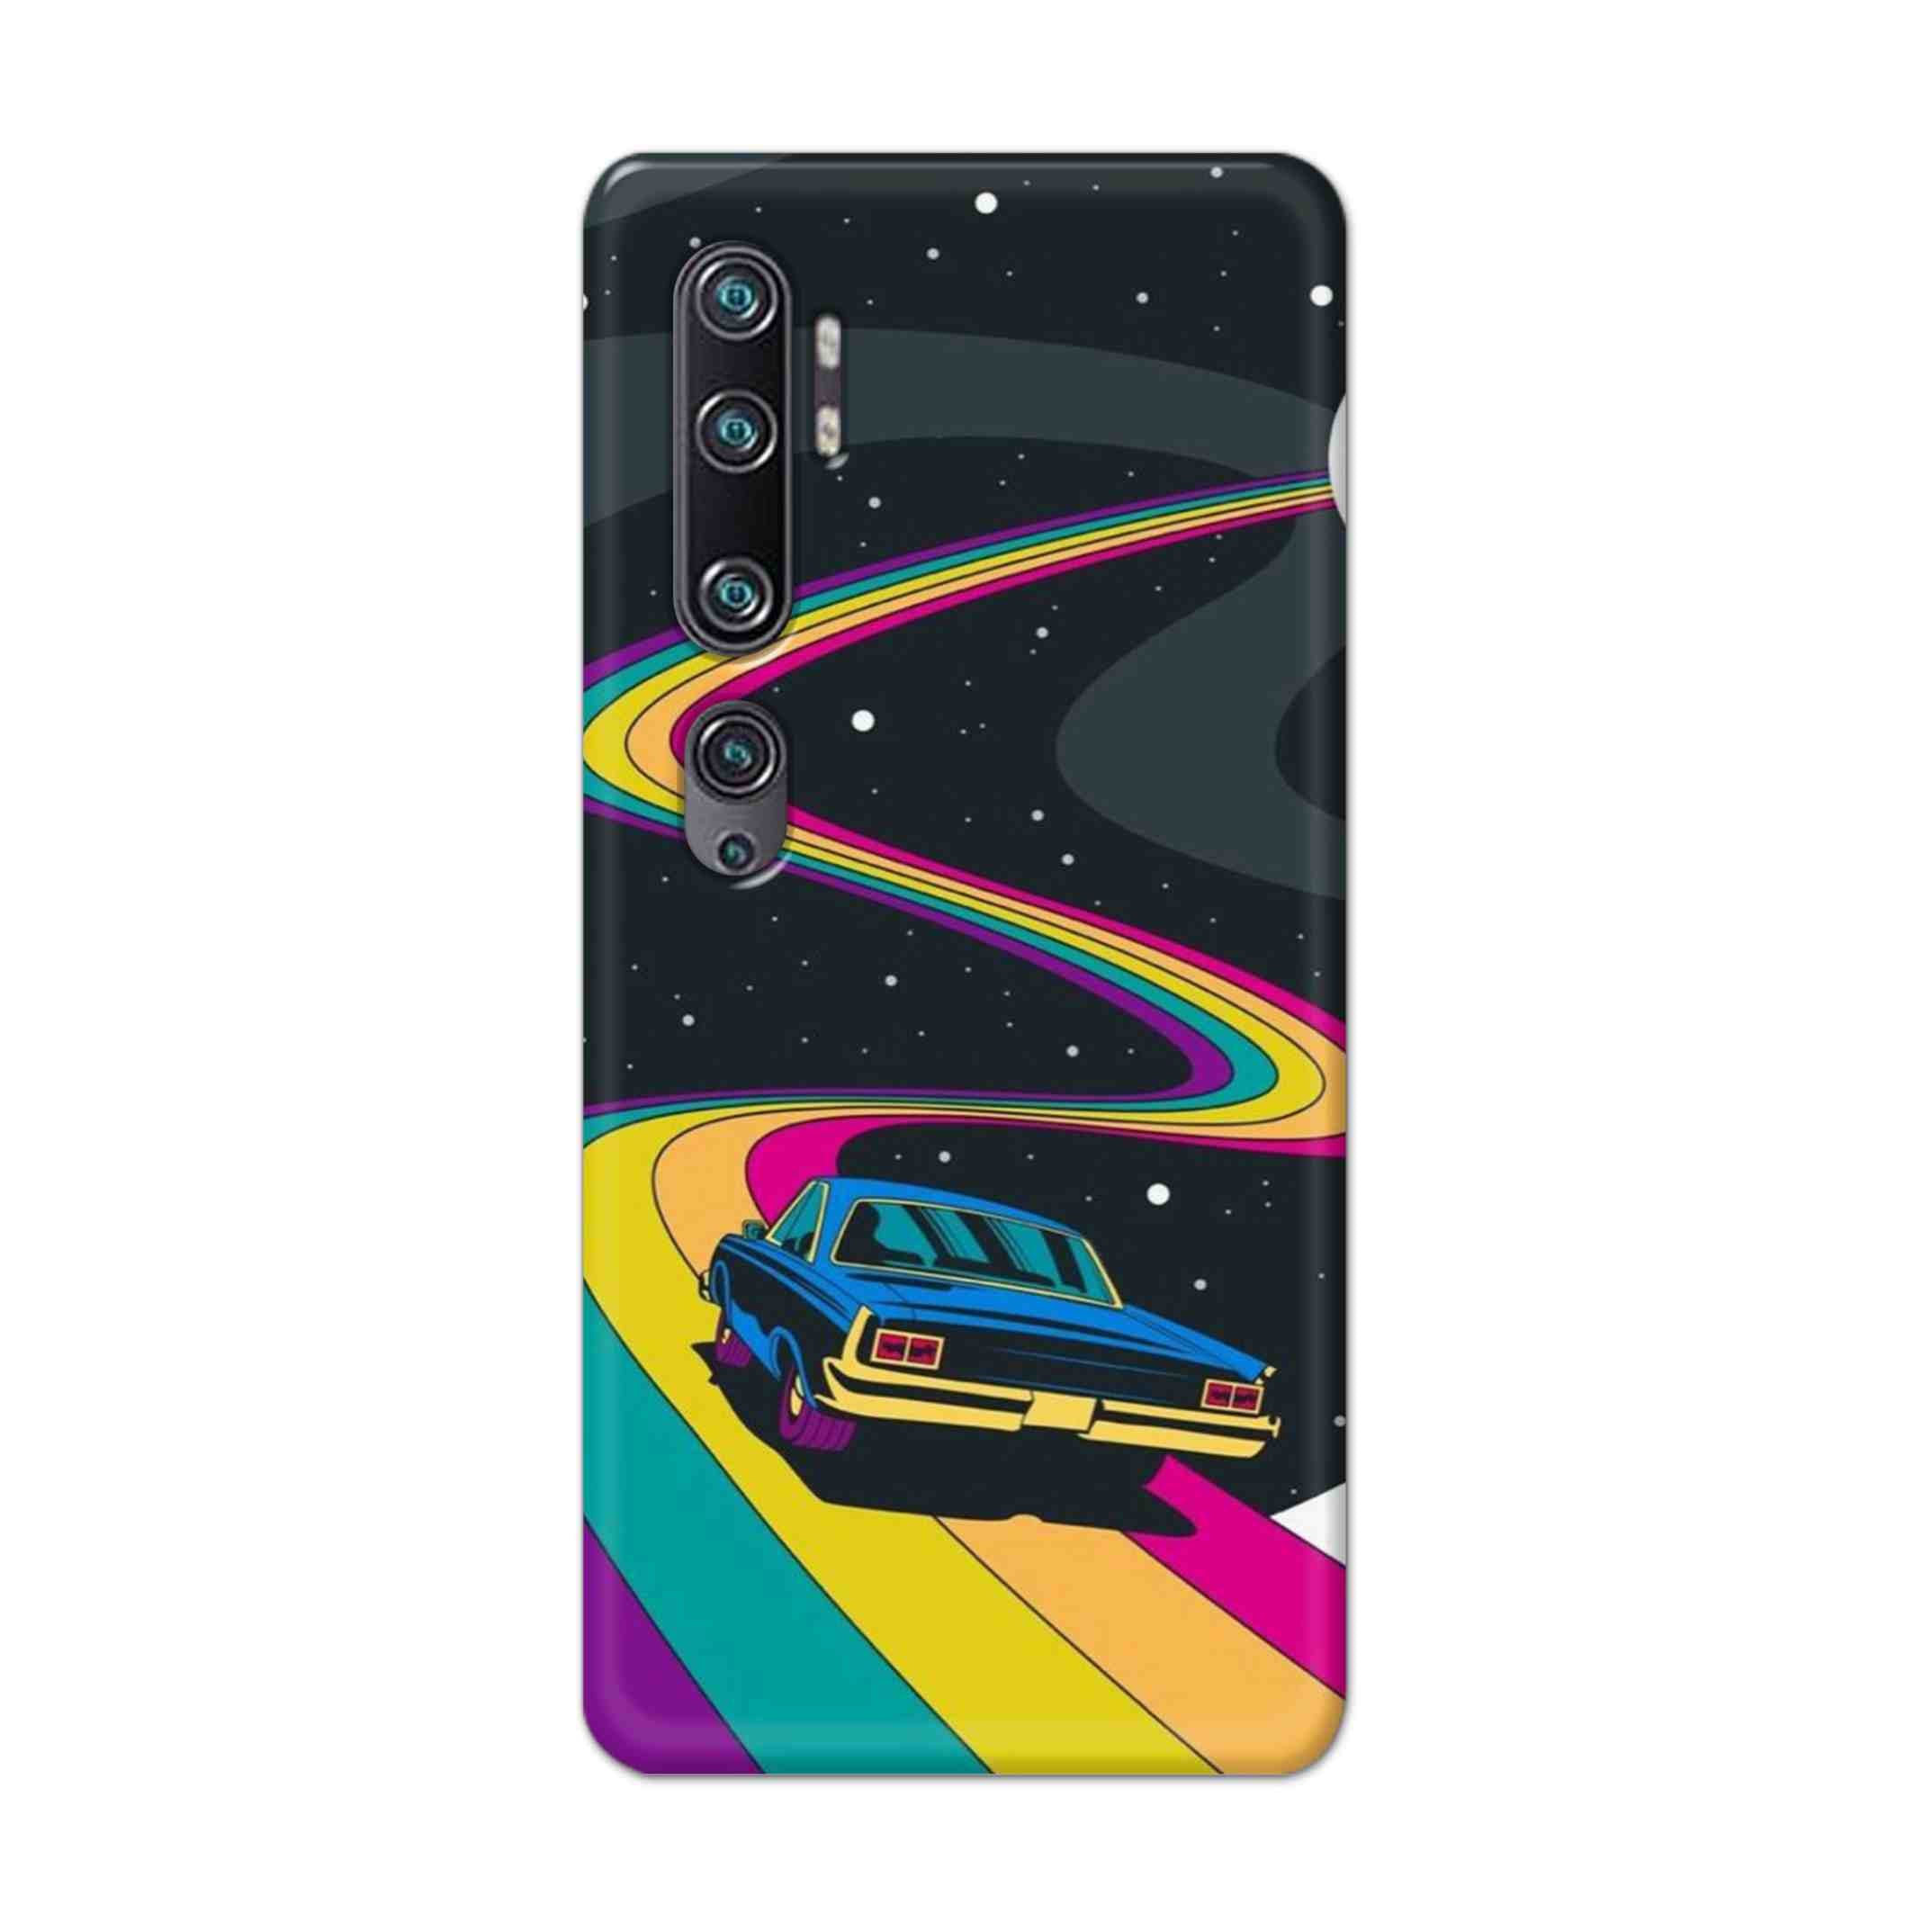 Buy  Neon Car Hard Back Mobile Phone Case Cover For Xiaomi Mi Note 10 Pro Online